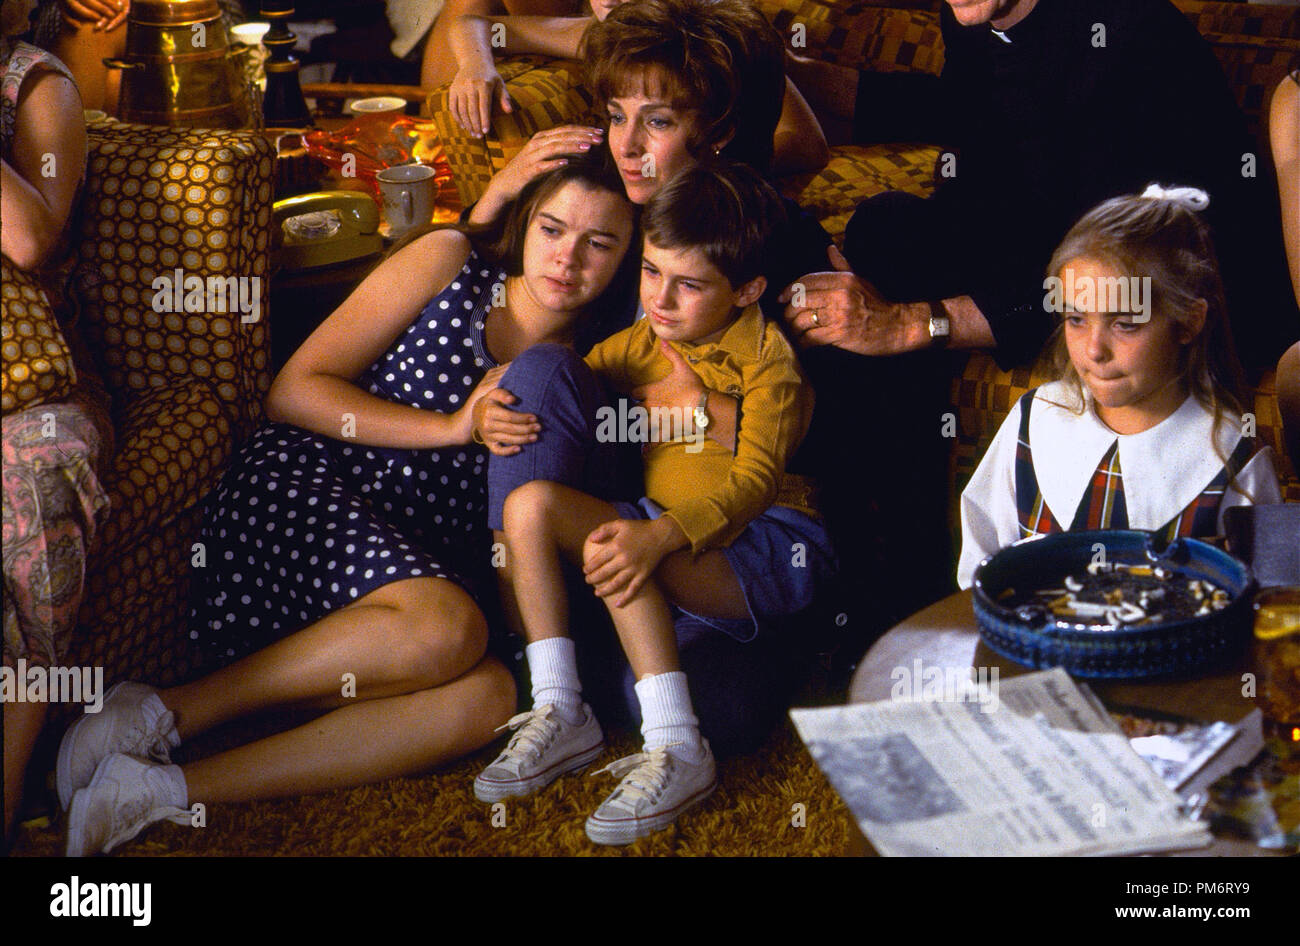 Film Still from 'Apollo 13' Kathleen Quinlan, Emily Ann Lloyd, Miko Hughes, Mary Kate Schellhardt © 1995 Universal Pictures    File Reference # 31043667THA  For Editorial Use Only - All Rights Reserved Stock Photo